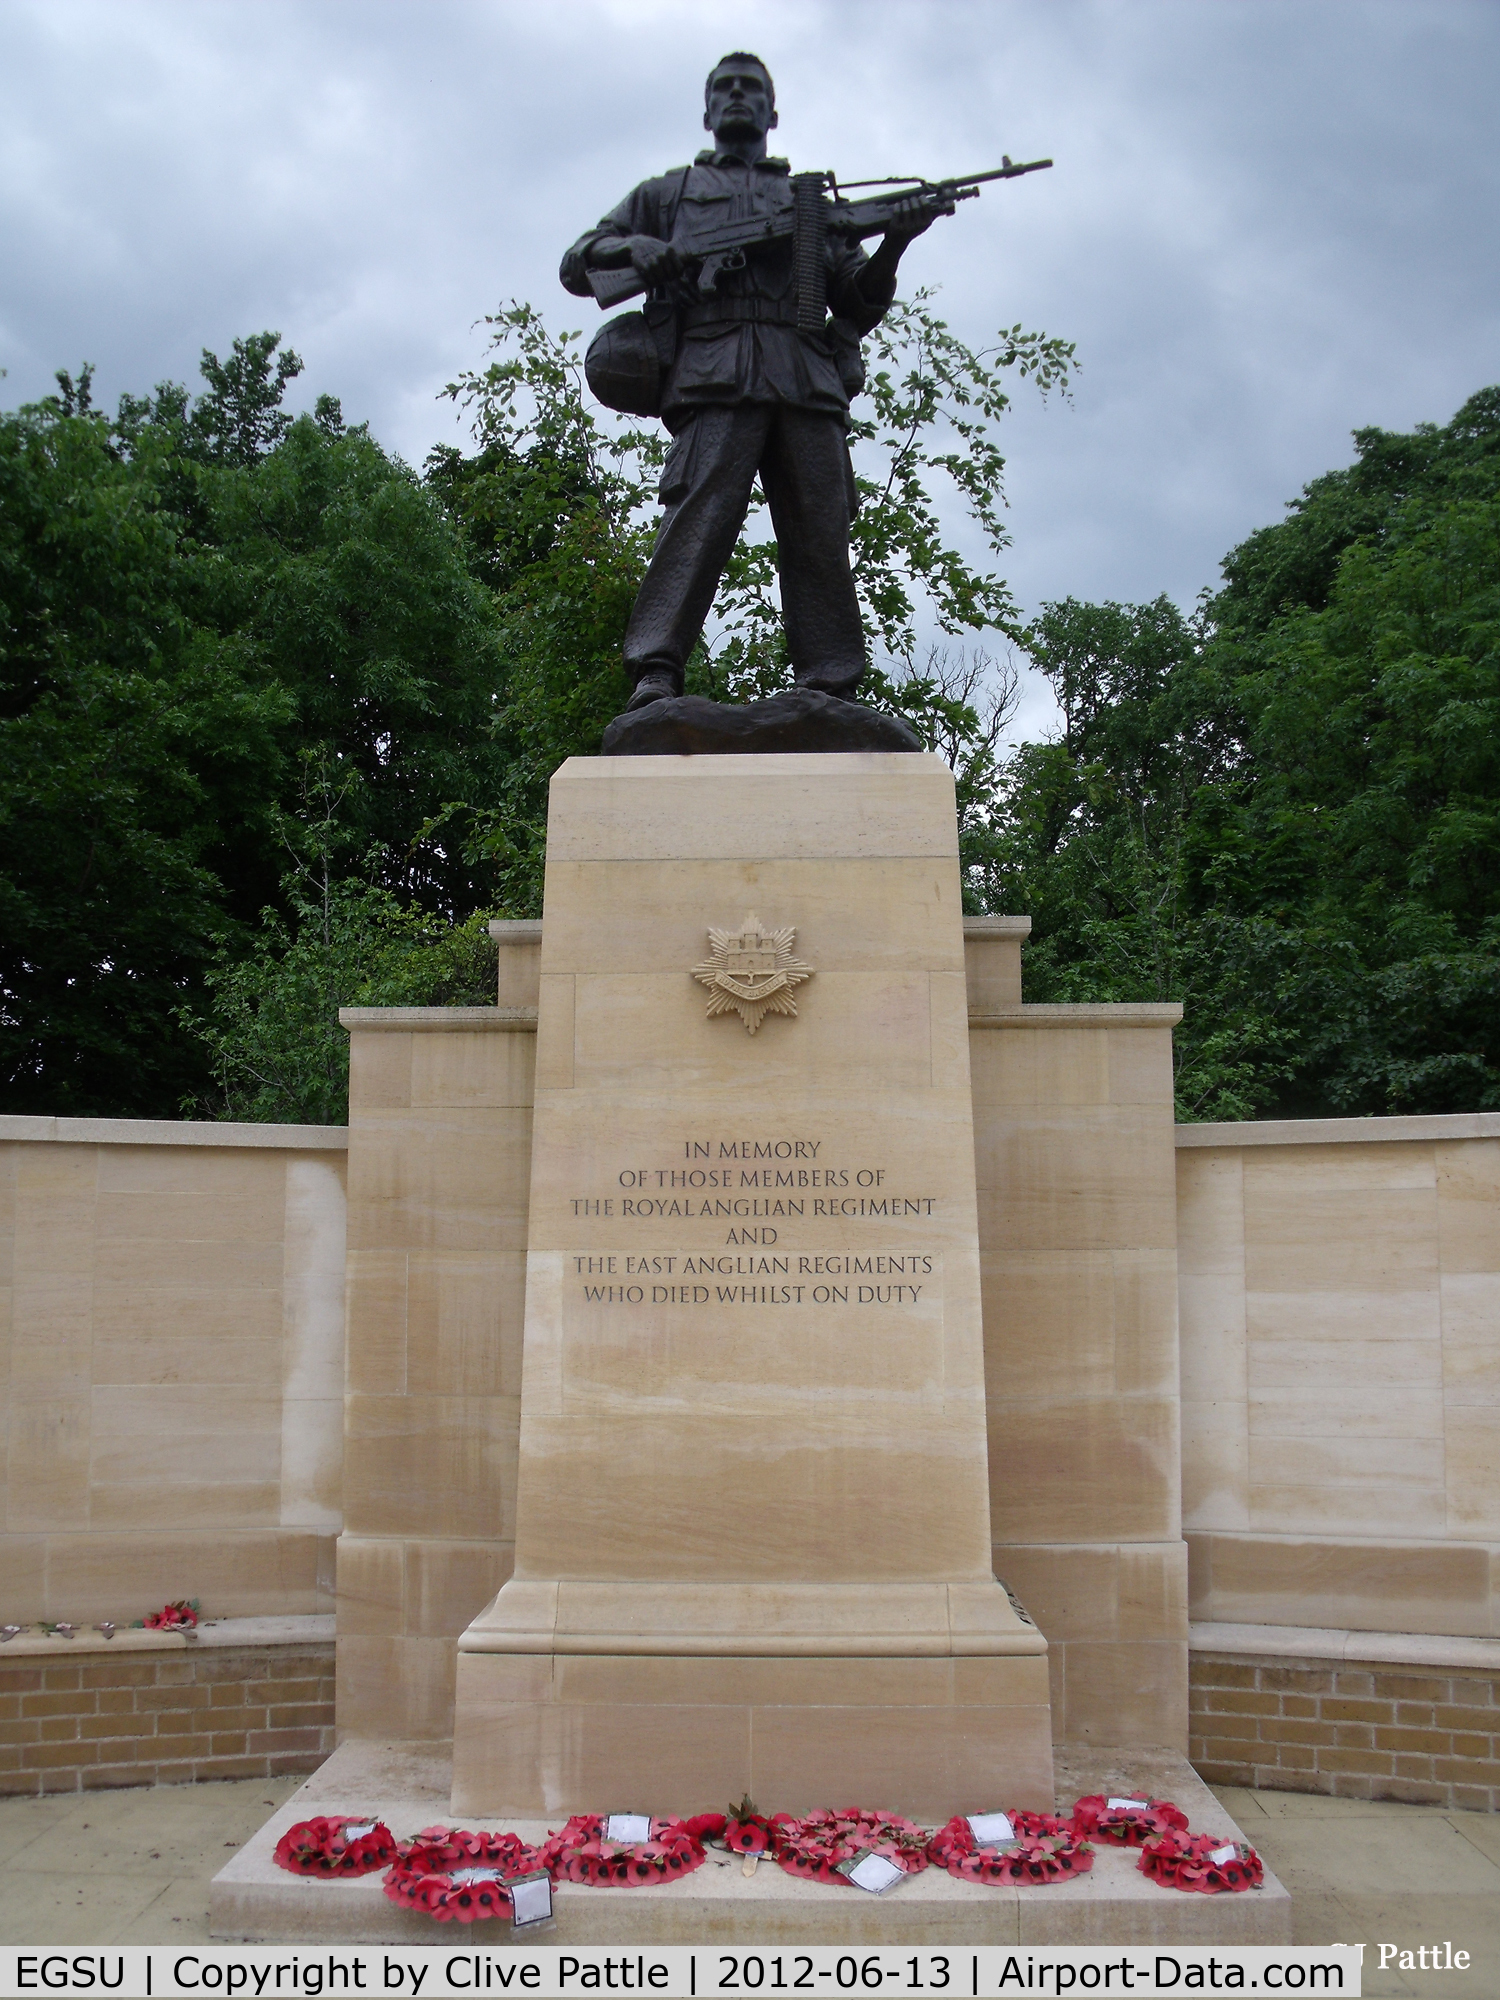 Duxford Airport, Cambridge, England United Kingdom (EGSU) - A memorial to both the Royal Anglian and East Anglian Regiments within the IWM complex at Duxford EGSU